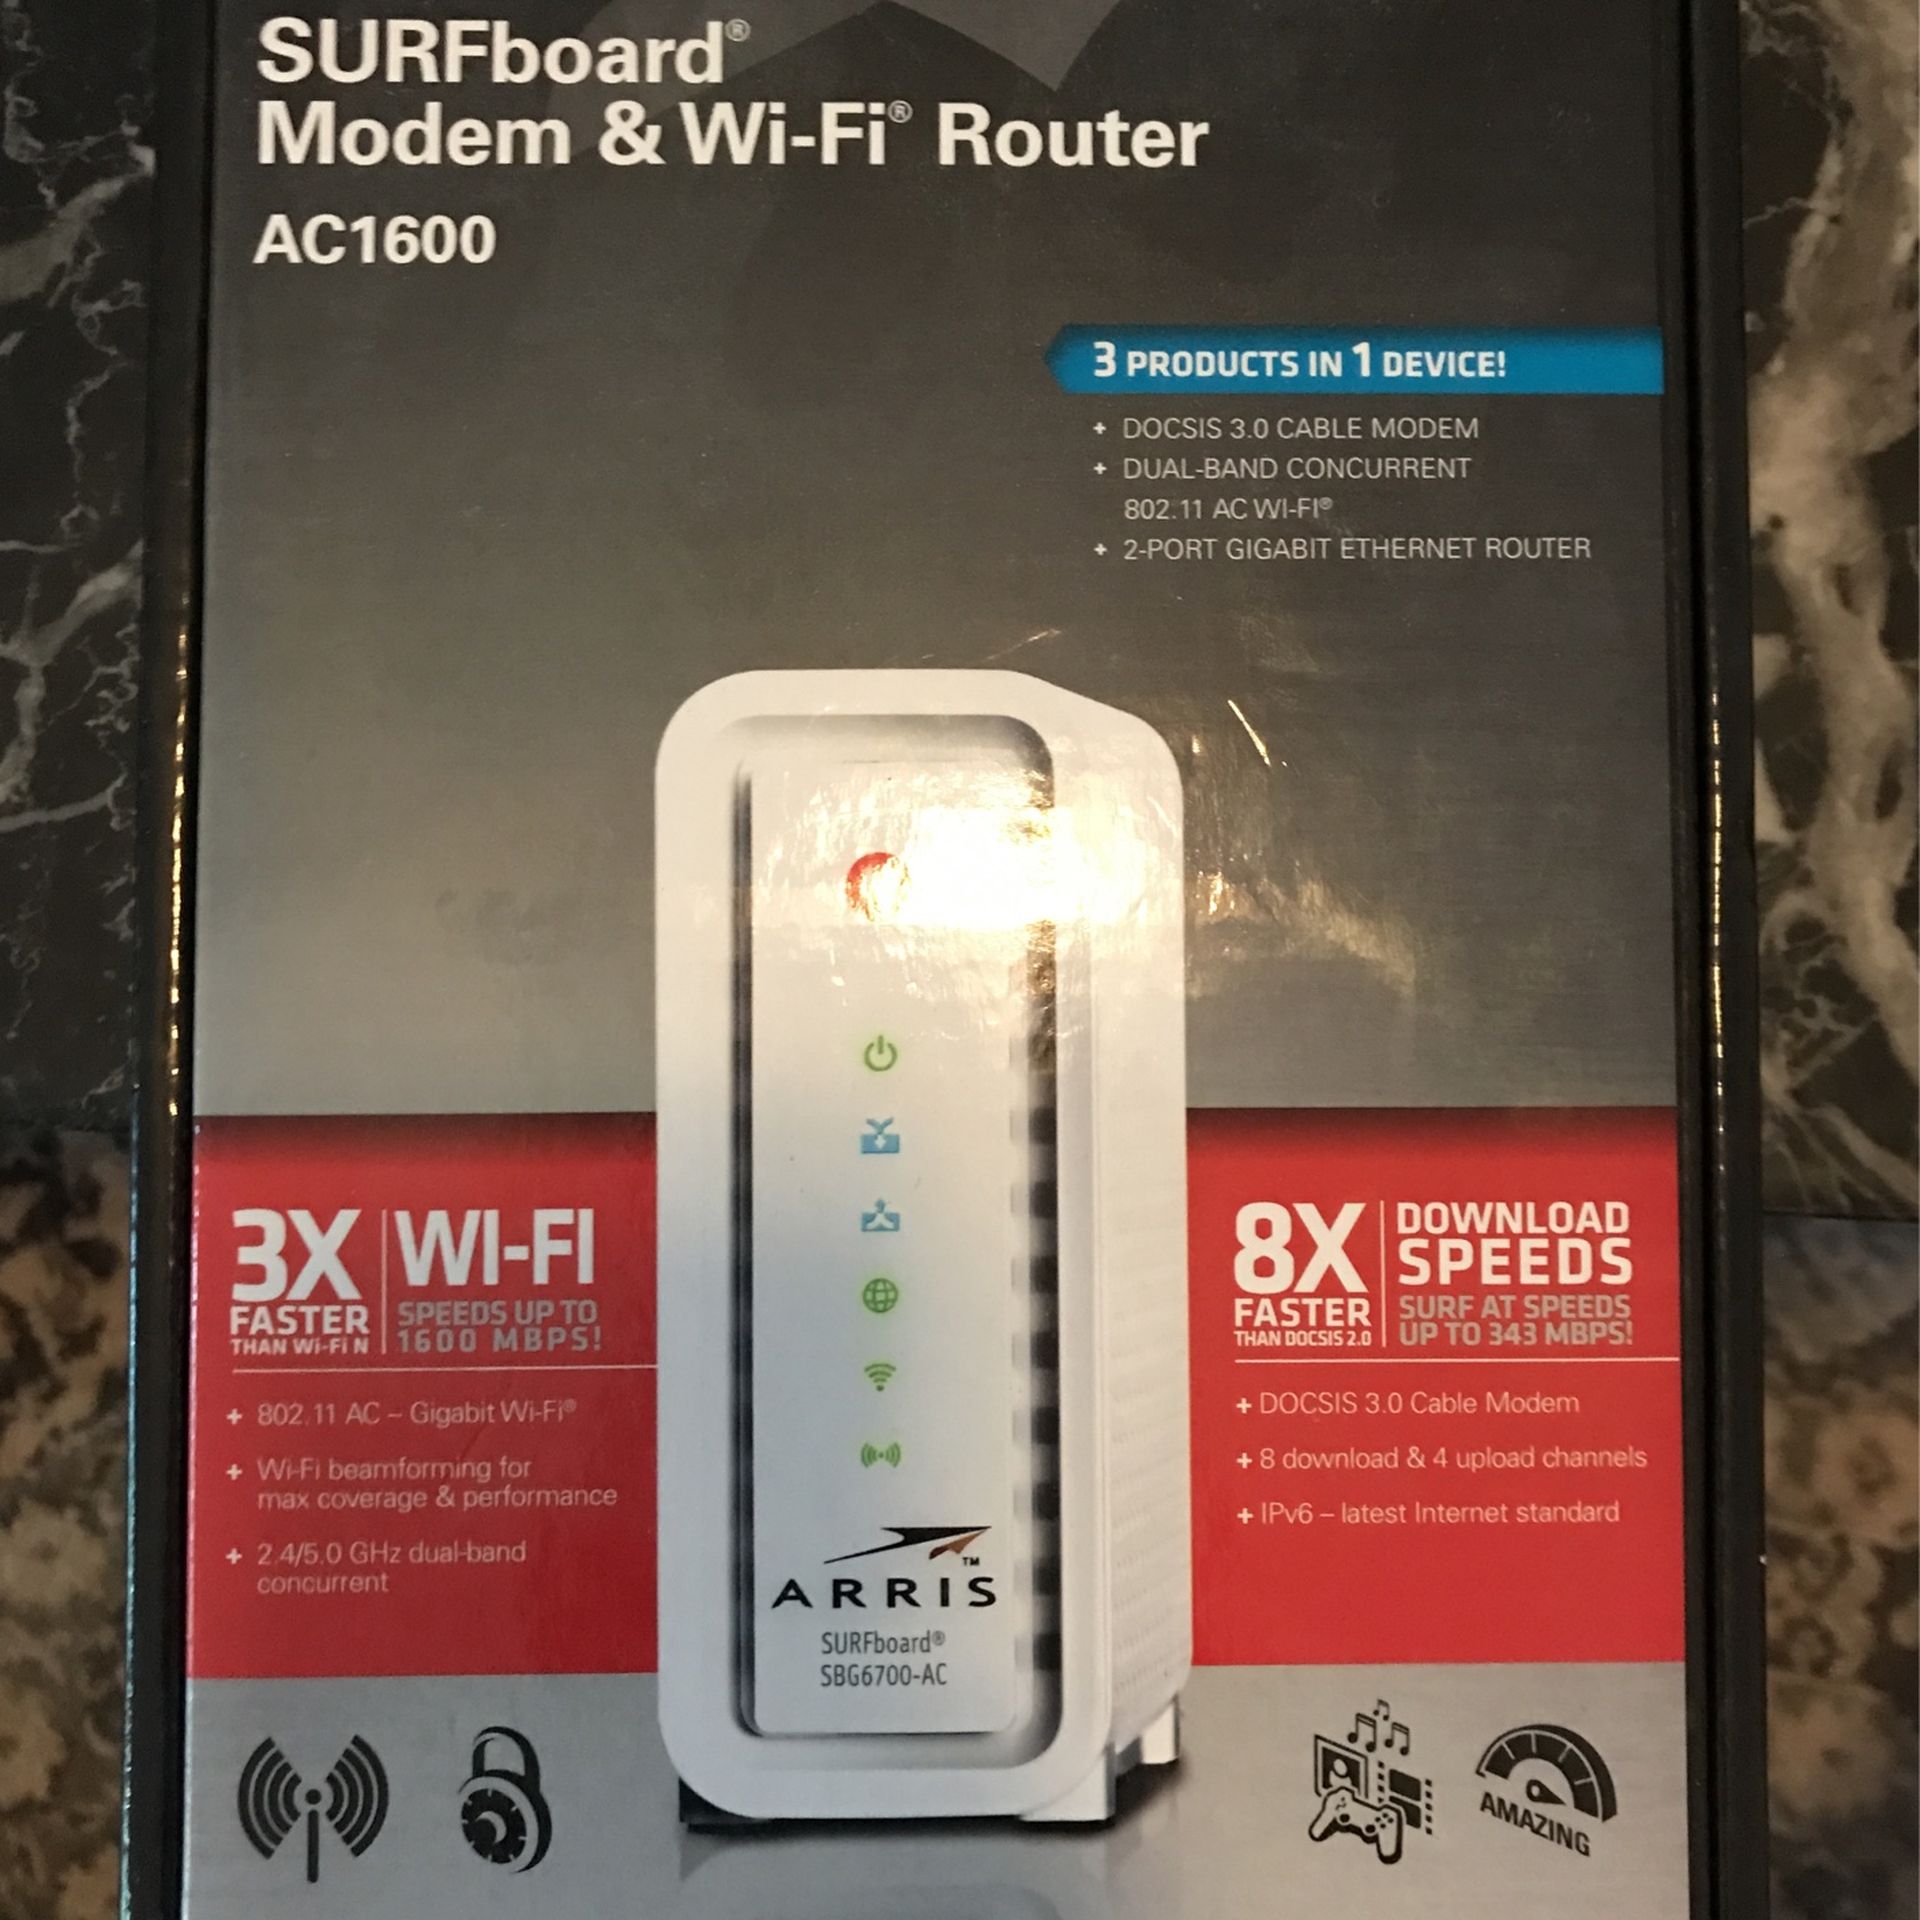 SURFboard Modem & Wi-Fi Router; White